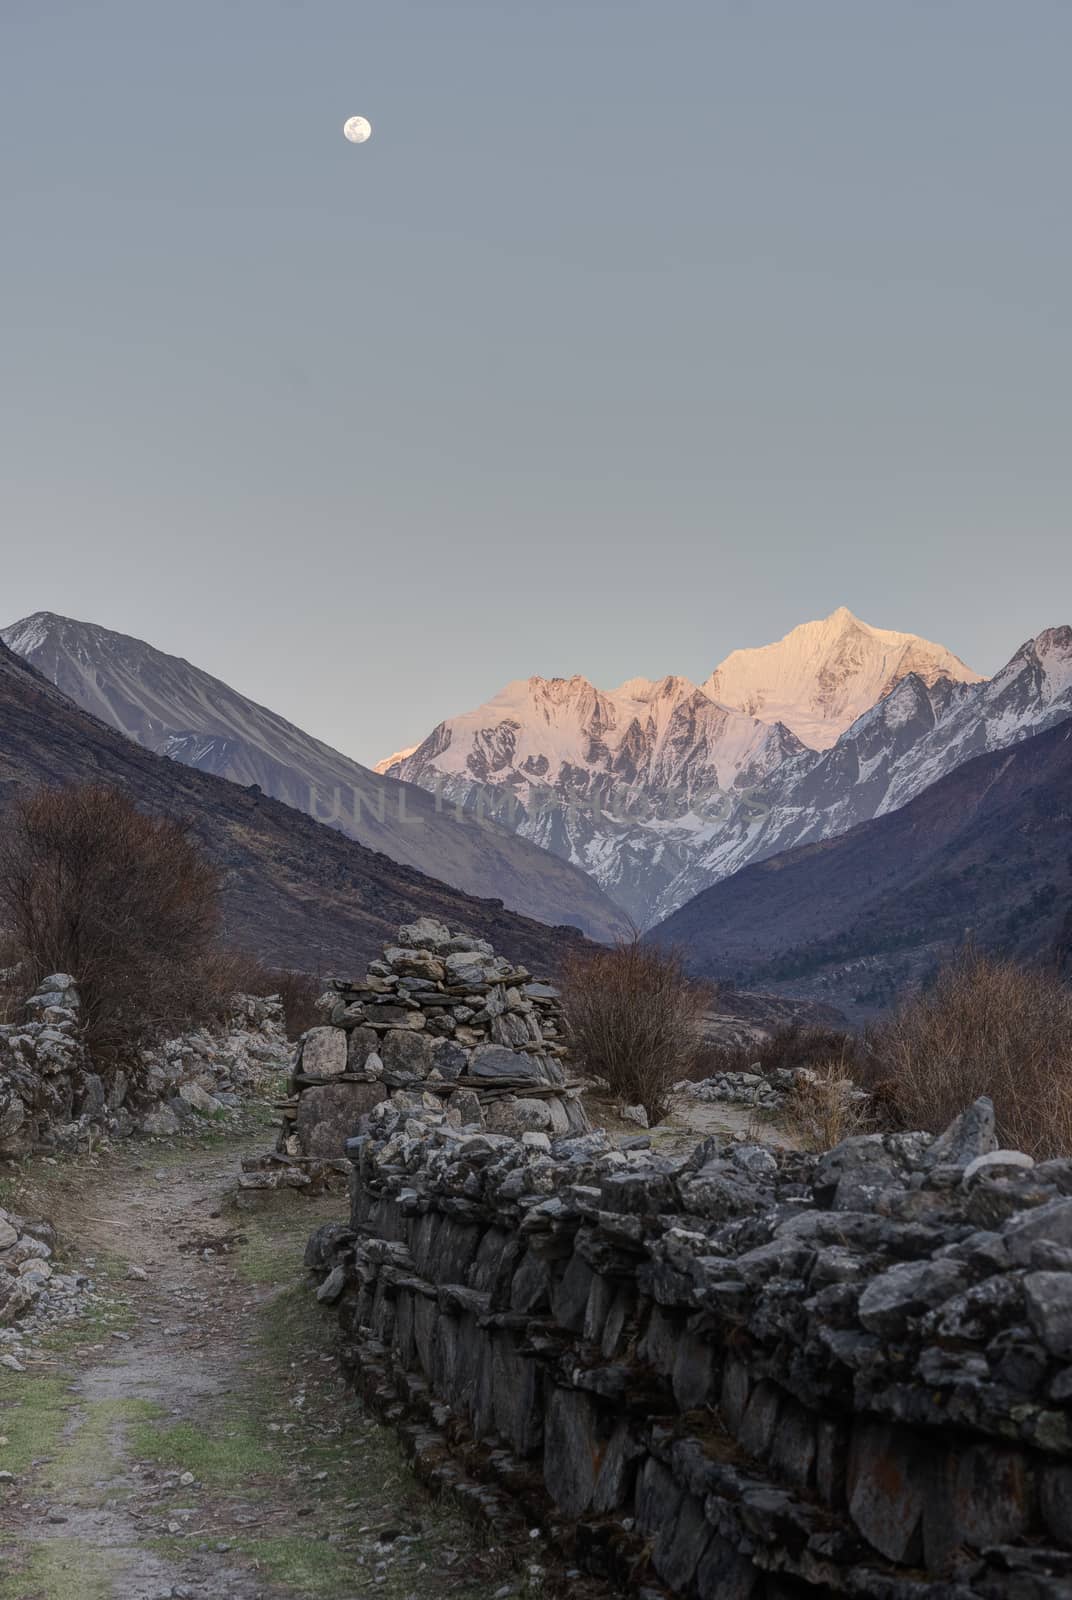 Moon and old wall ruin in Nepal trek